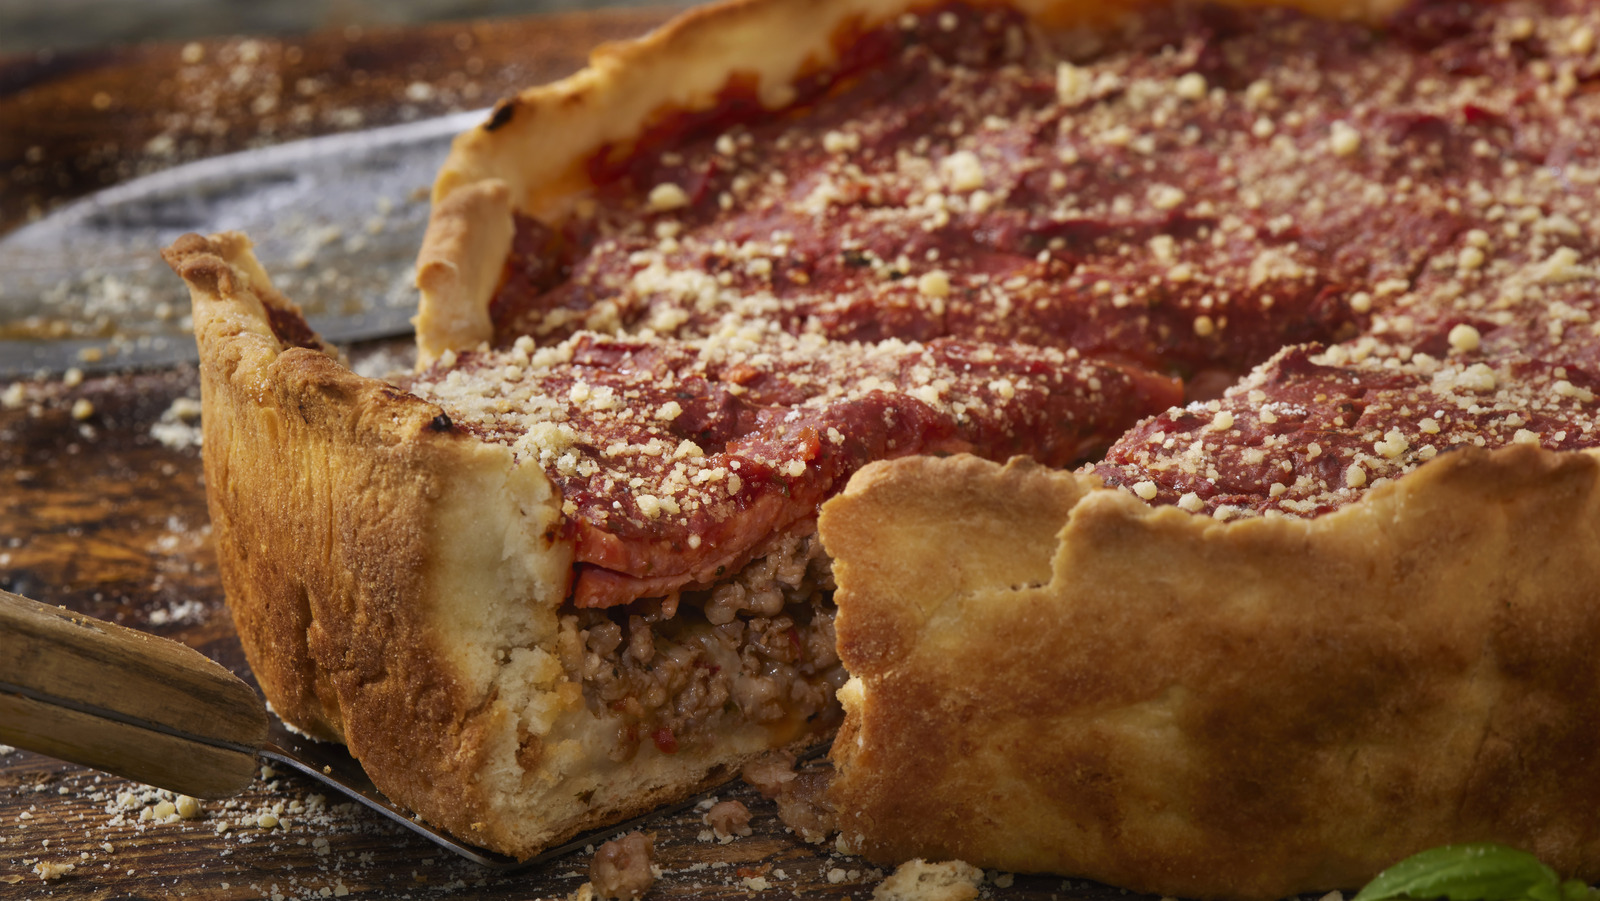 https://www.foodrepublic.com/img/gallery/12-tips-you-need-when-making-deep-dish-pizza-at-home/l-intro-1688067340.jpg